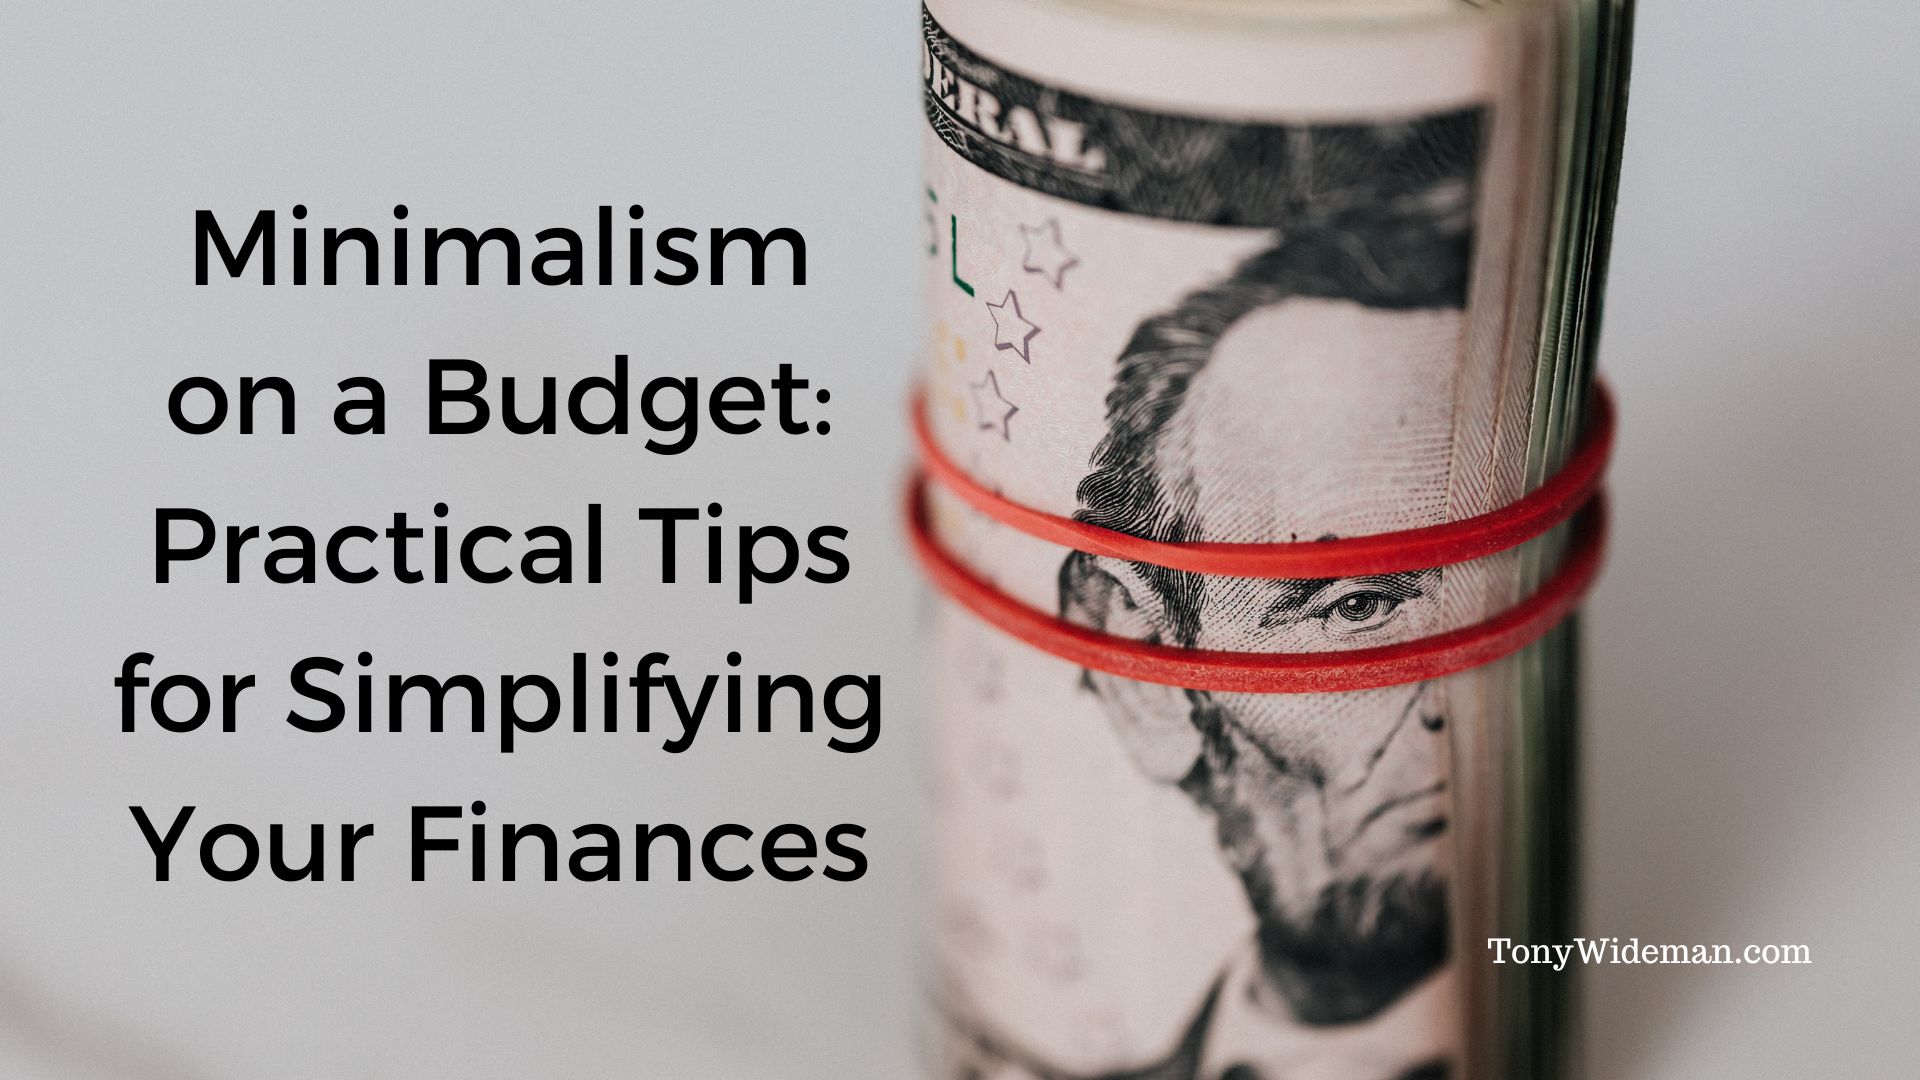 Minimalism on a Budget: Practical Tips for Simplifying Your Finances